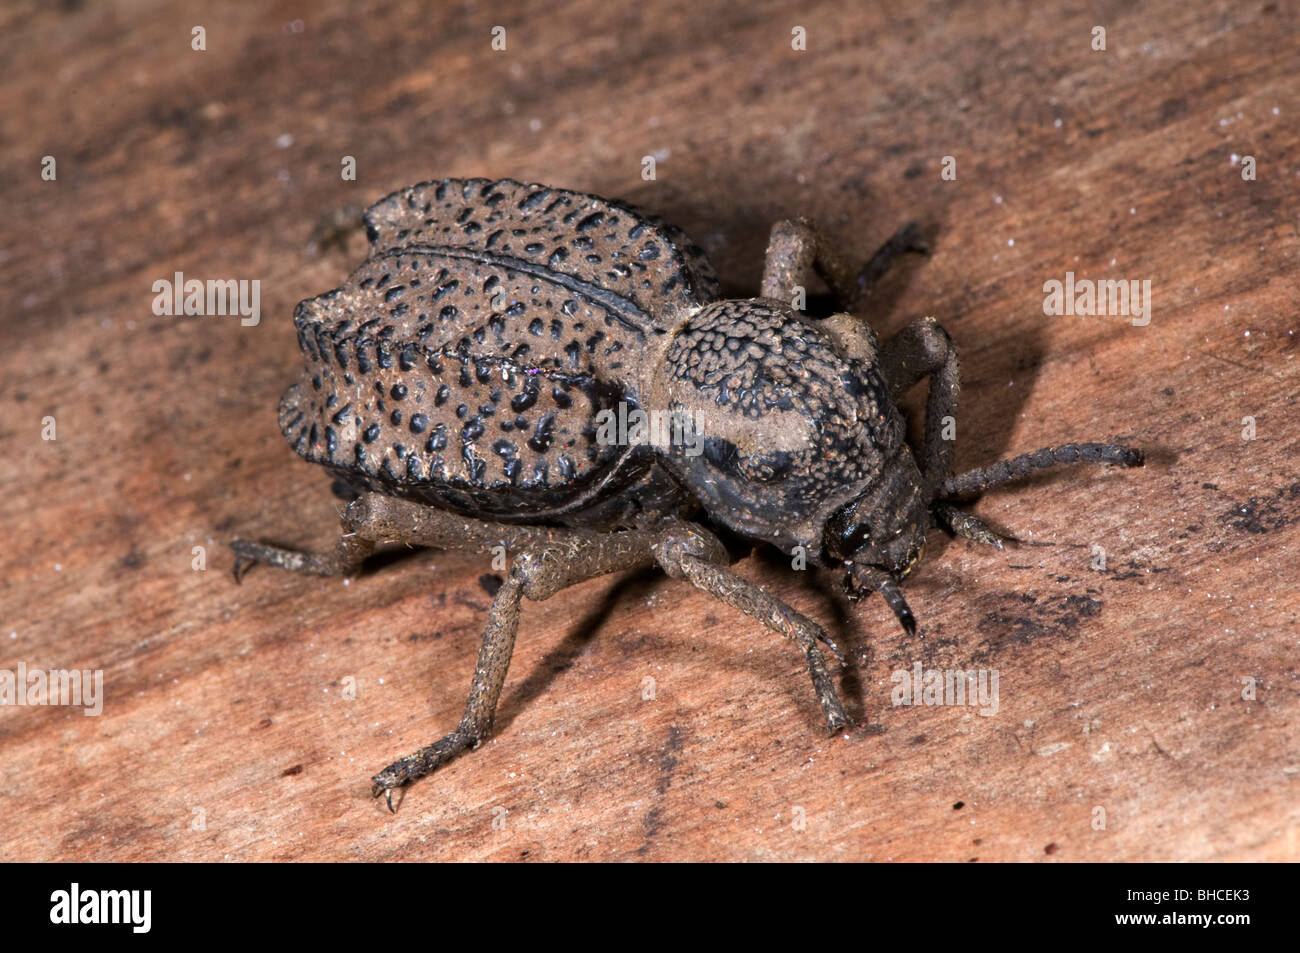 Tenebrionid beetle photographed in Tanzania, Africa. Stock Photo